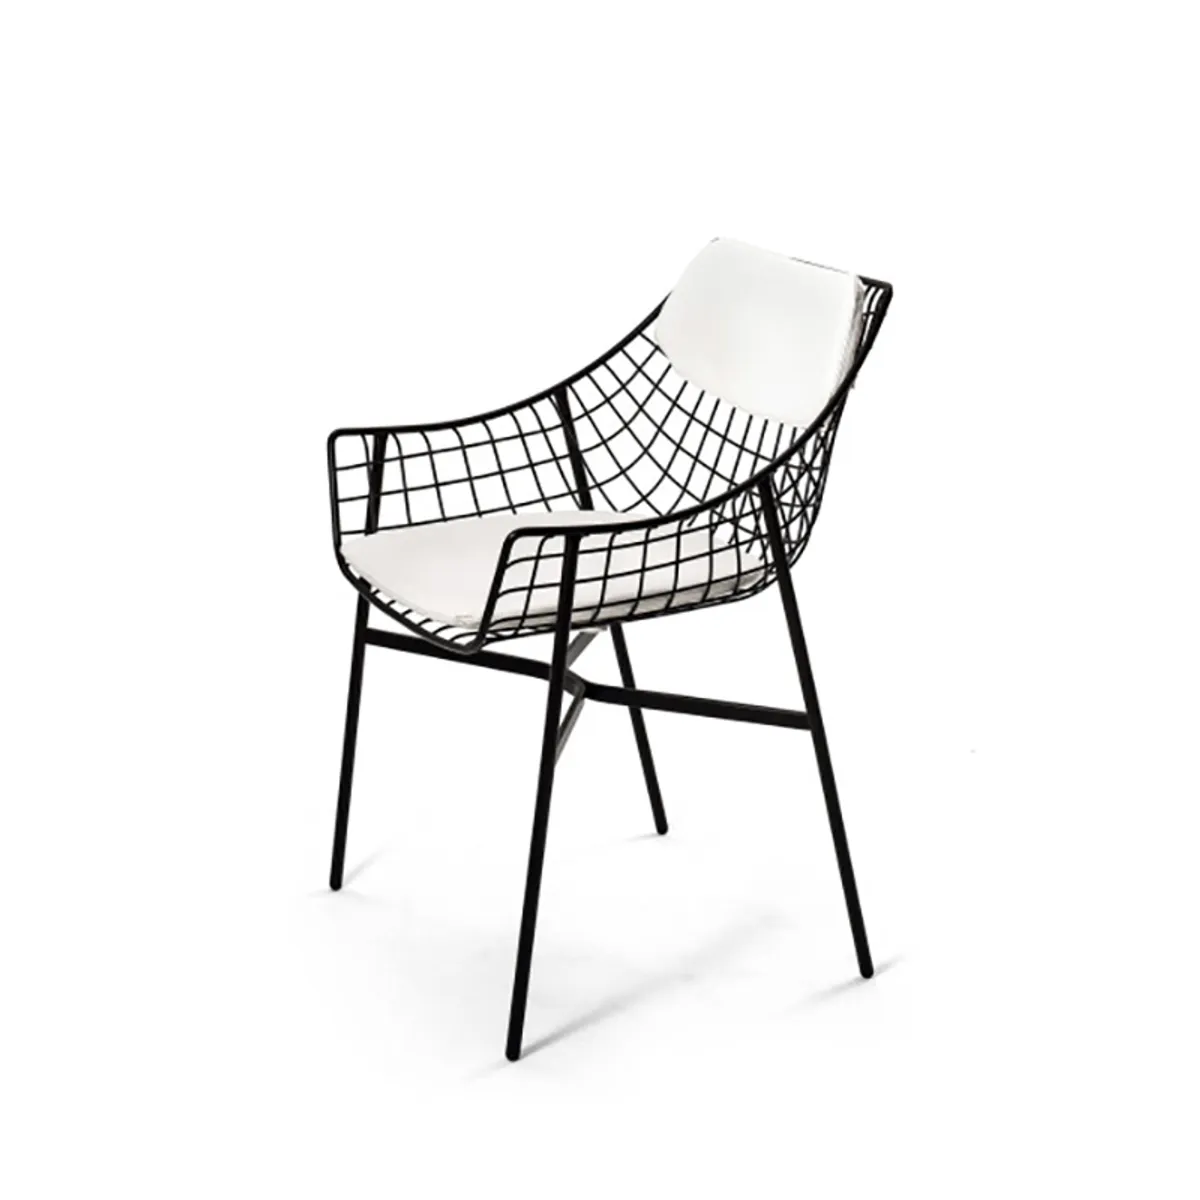 Summer Black Metal Armchair With Back Rest And Seat Pad For Furnishing Hotels And Cafes By Insideoutcontracts